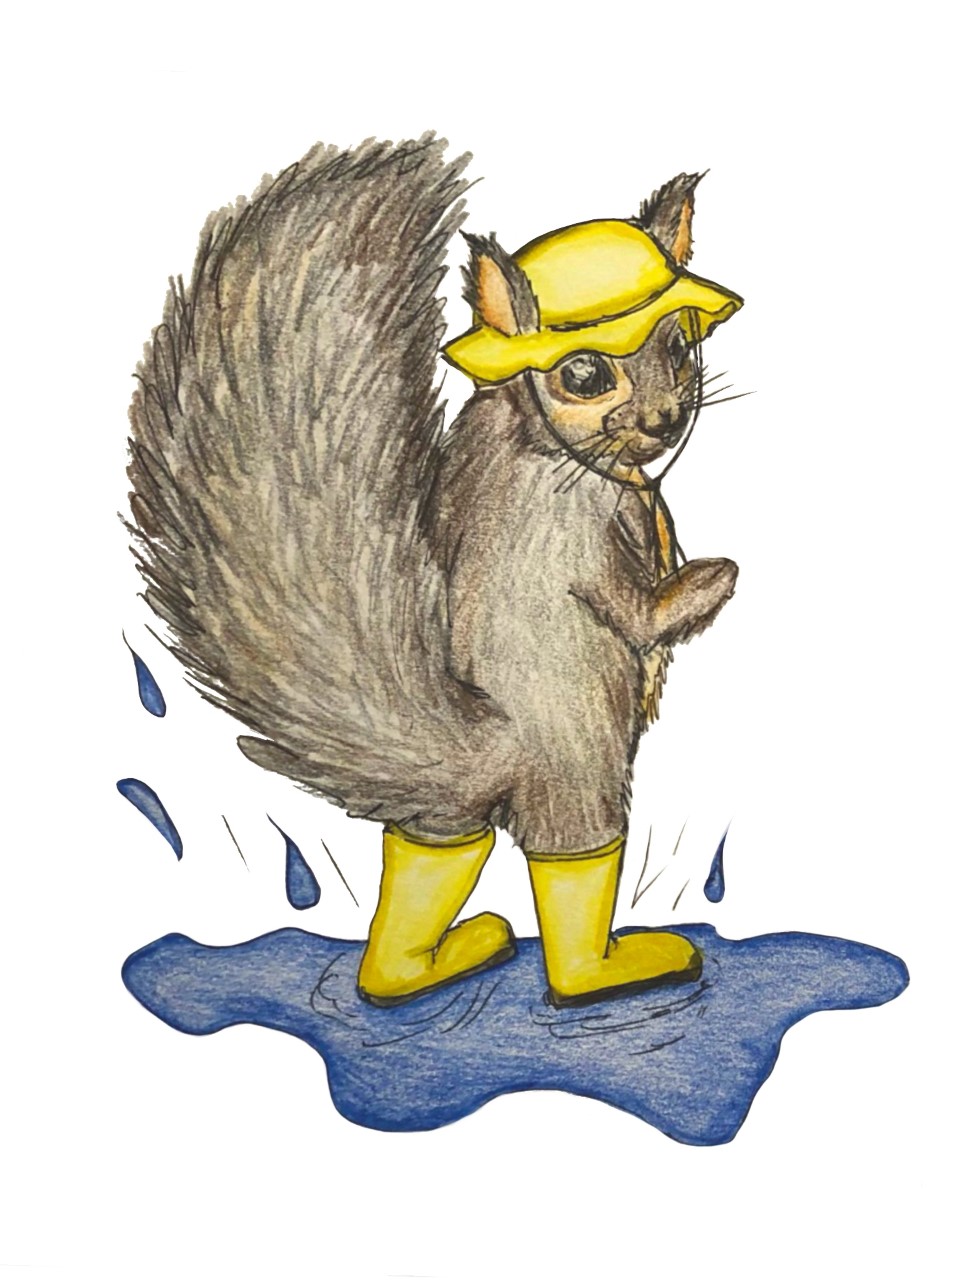 Squirrel in a rain hat and boots looking over it's shoulder, colored pencil illustration